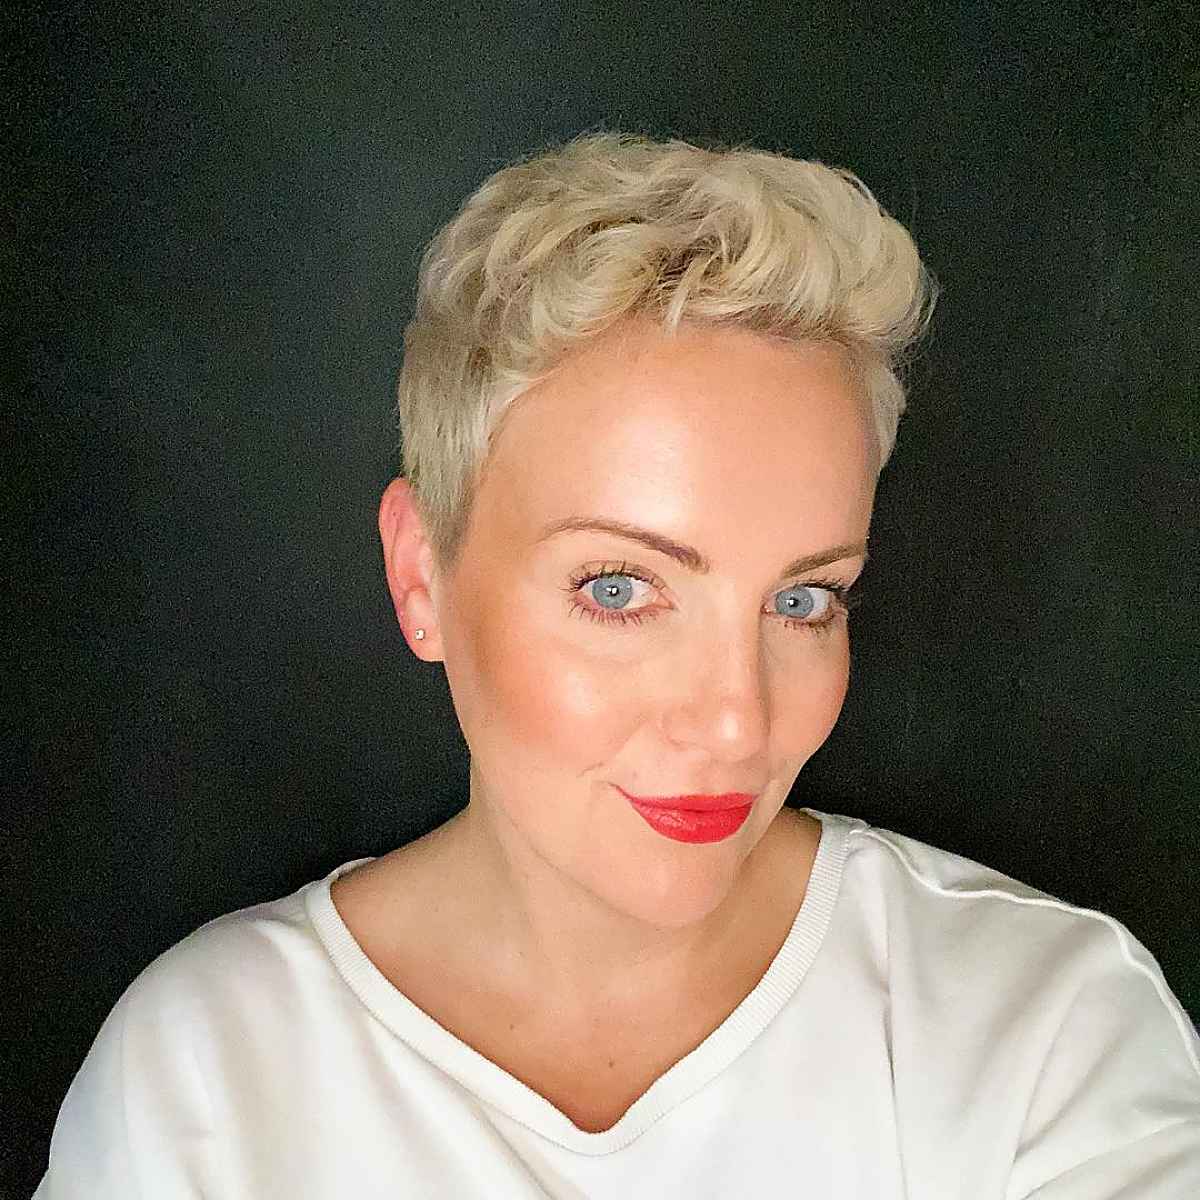 26 Very Short Pixie Haircuts for Confident Women